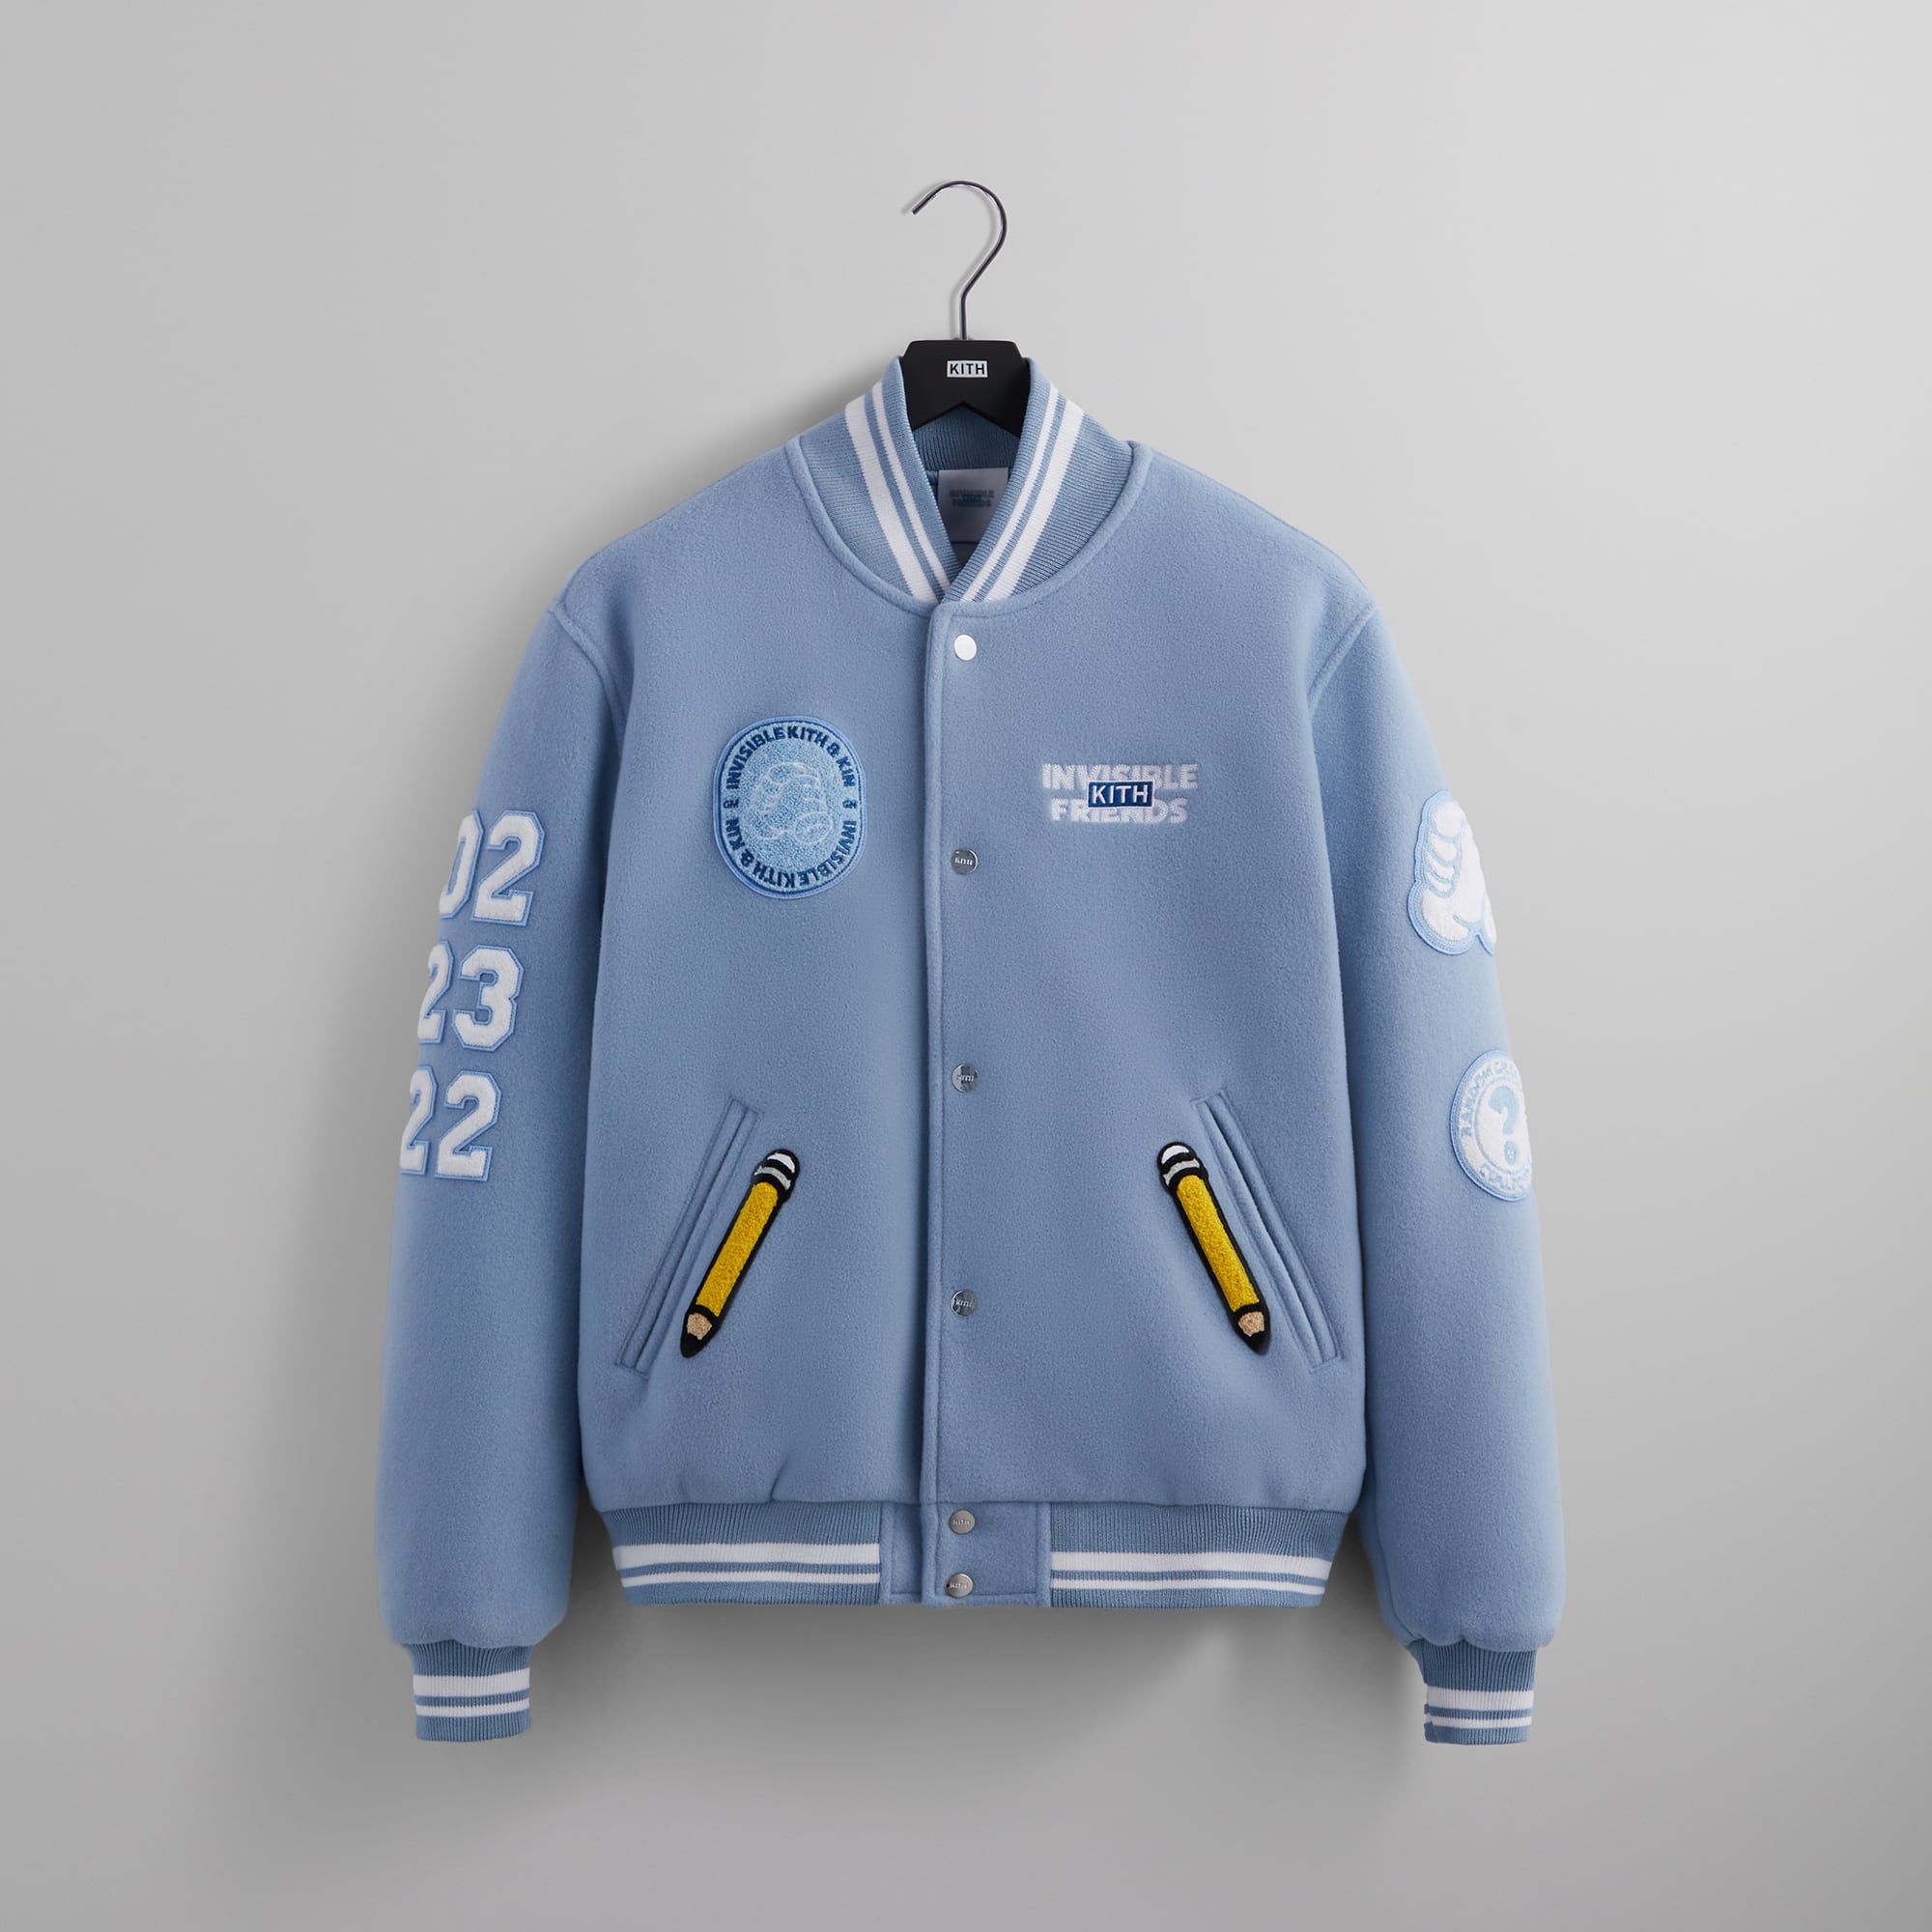 KITH x Invisible Friends M - Wool Bomber Jacket, Light Blue ...